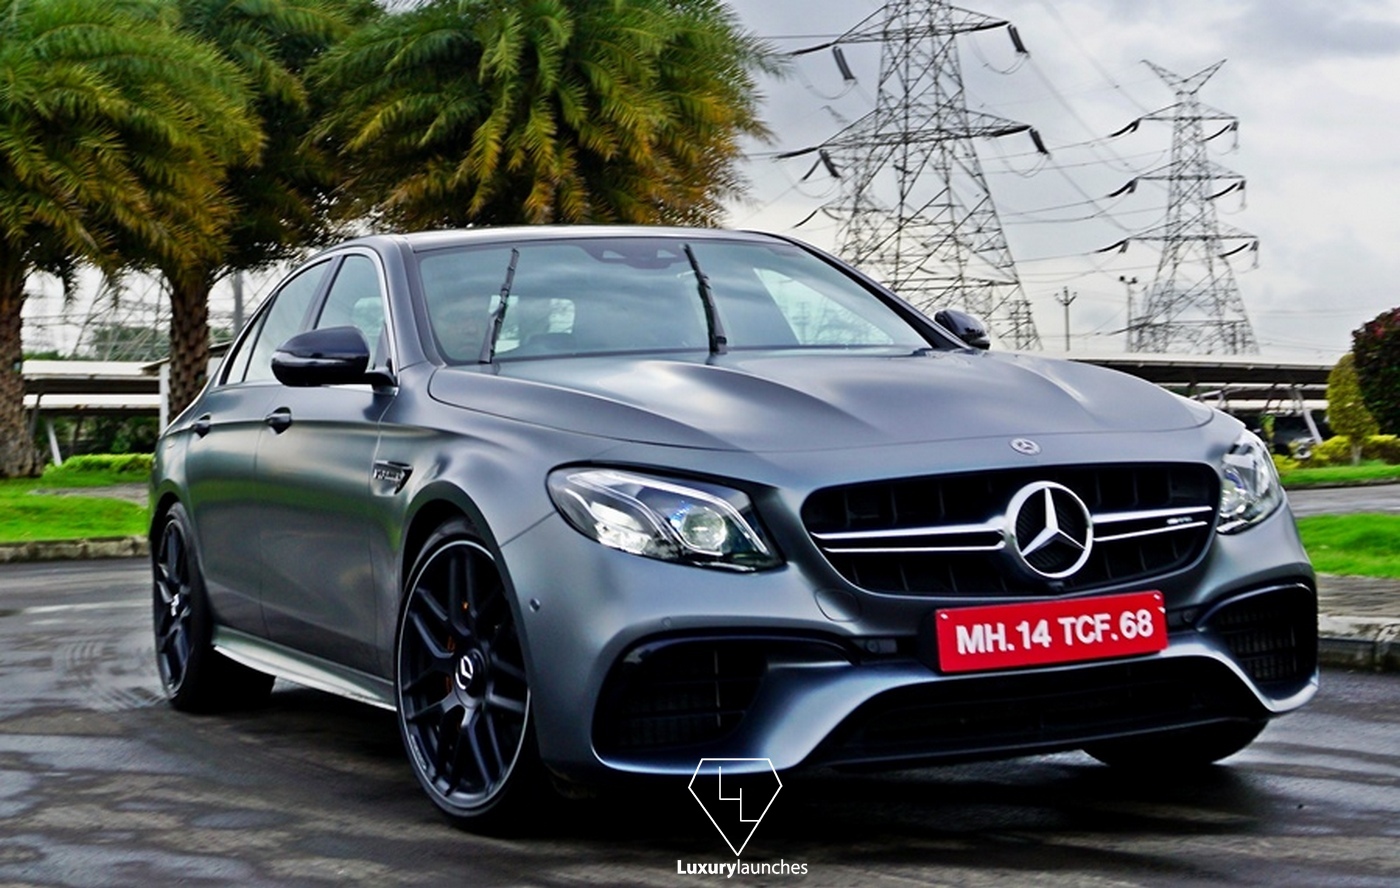 Review of Mercedes Benz E63 S AMG India